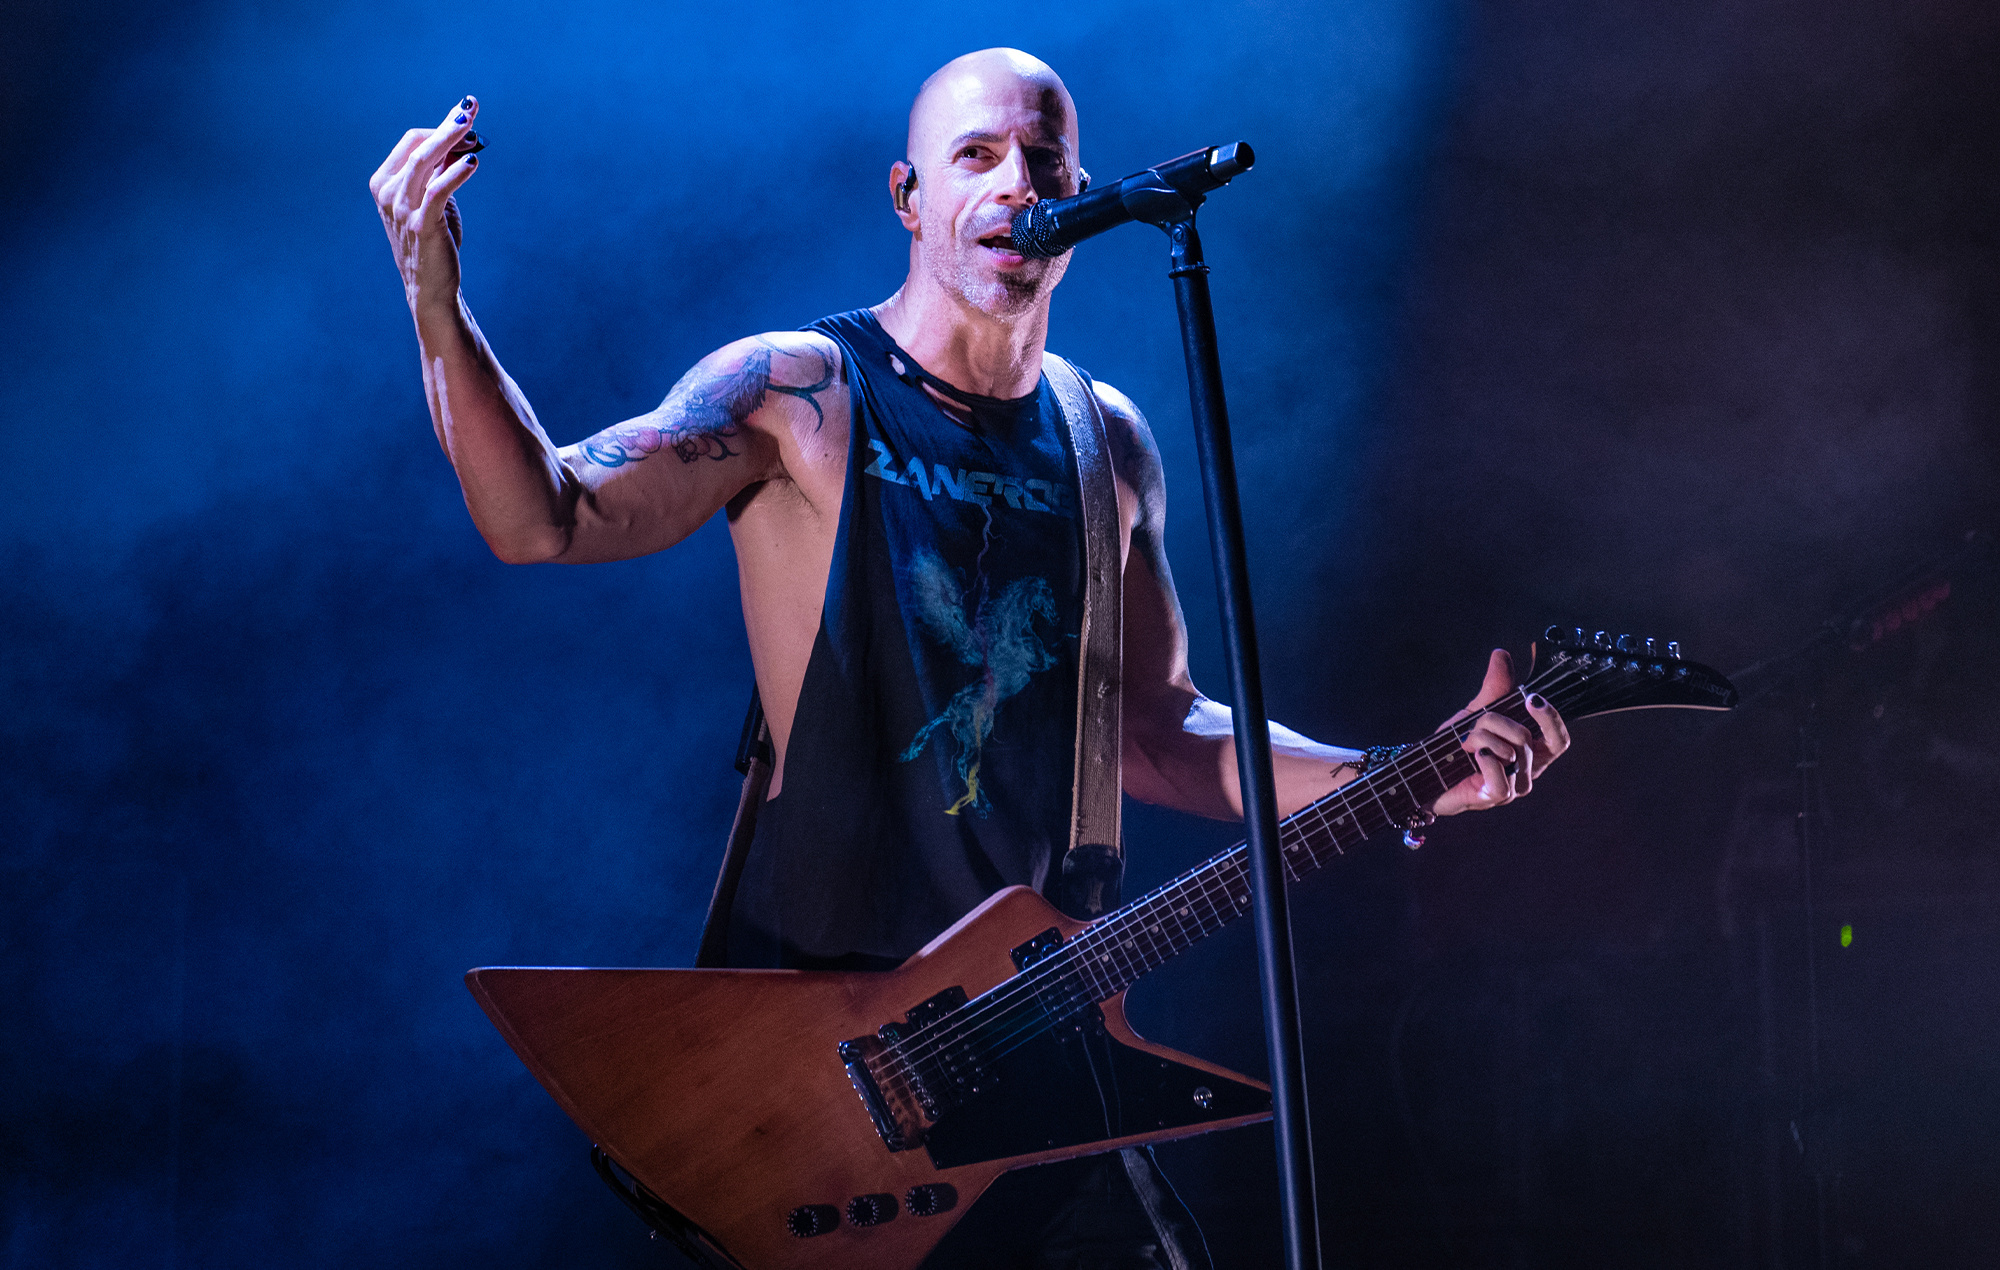 Daughtry (Band) Wallpapers (22+ images inside)